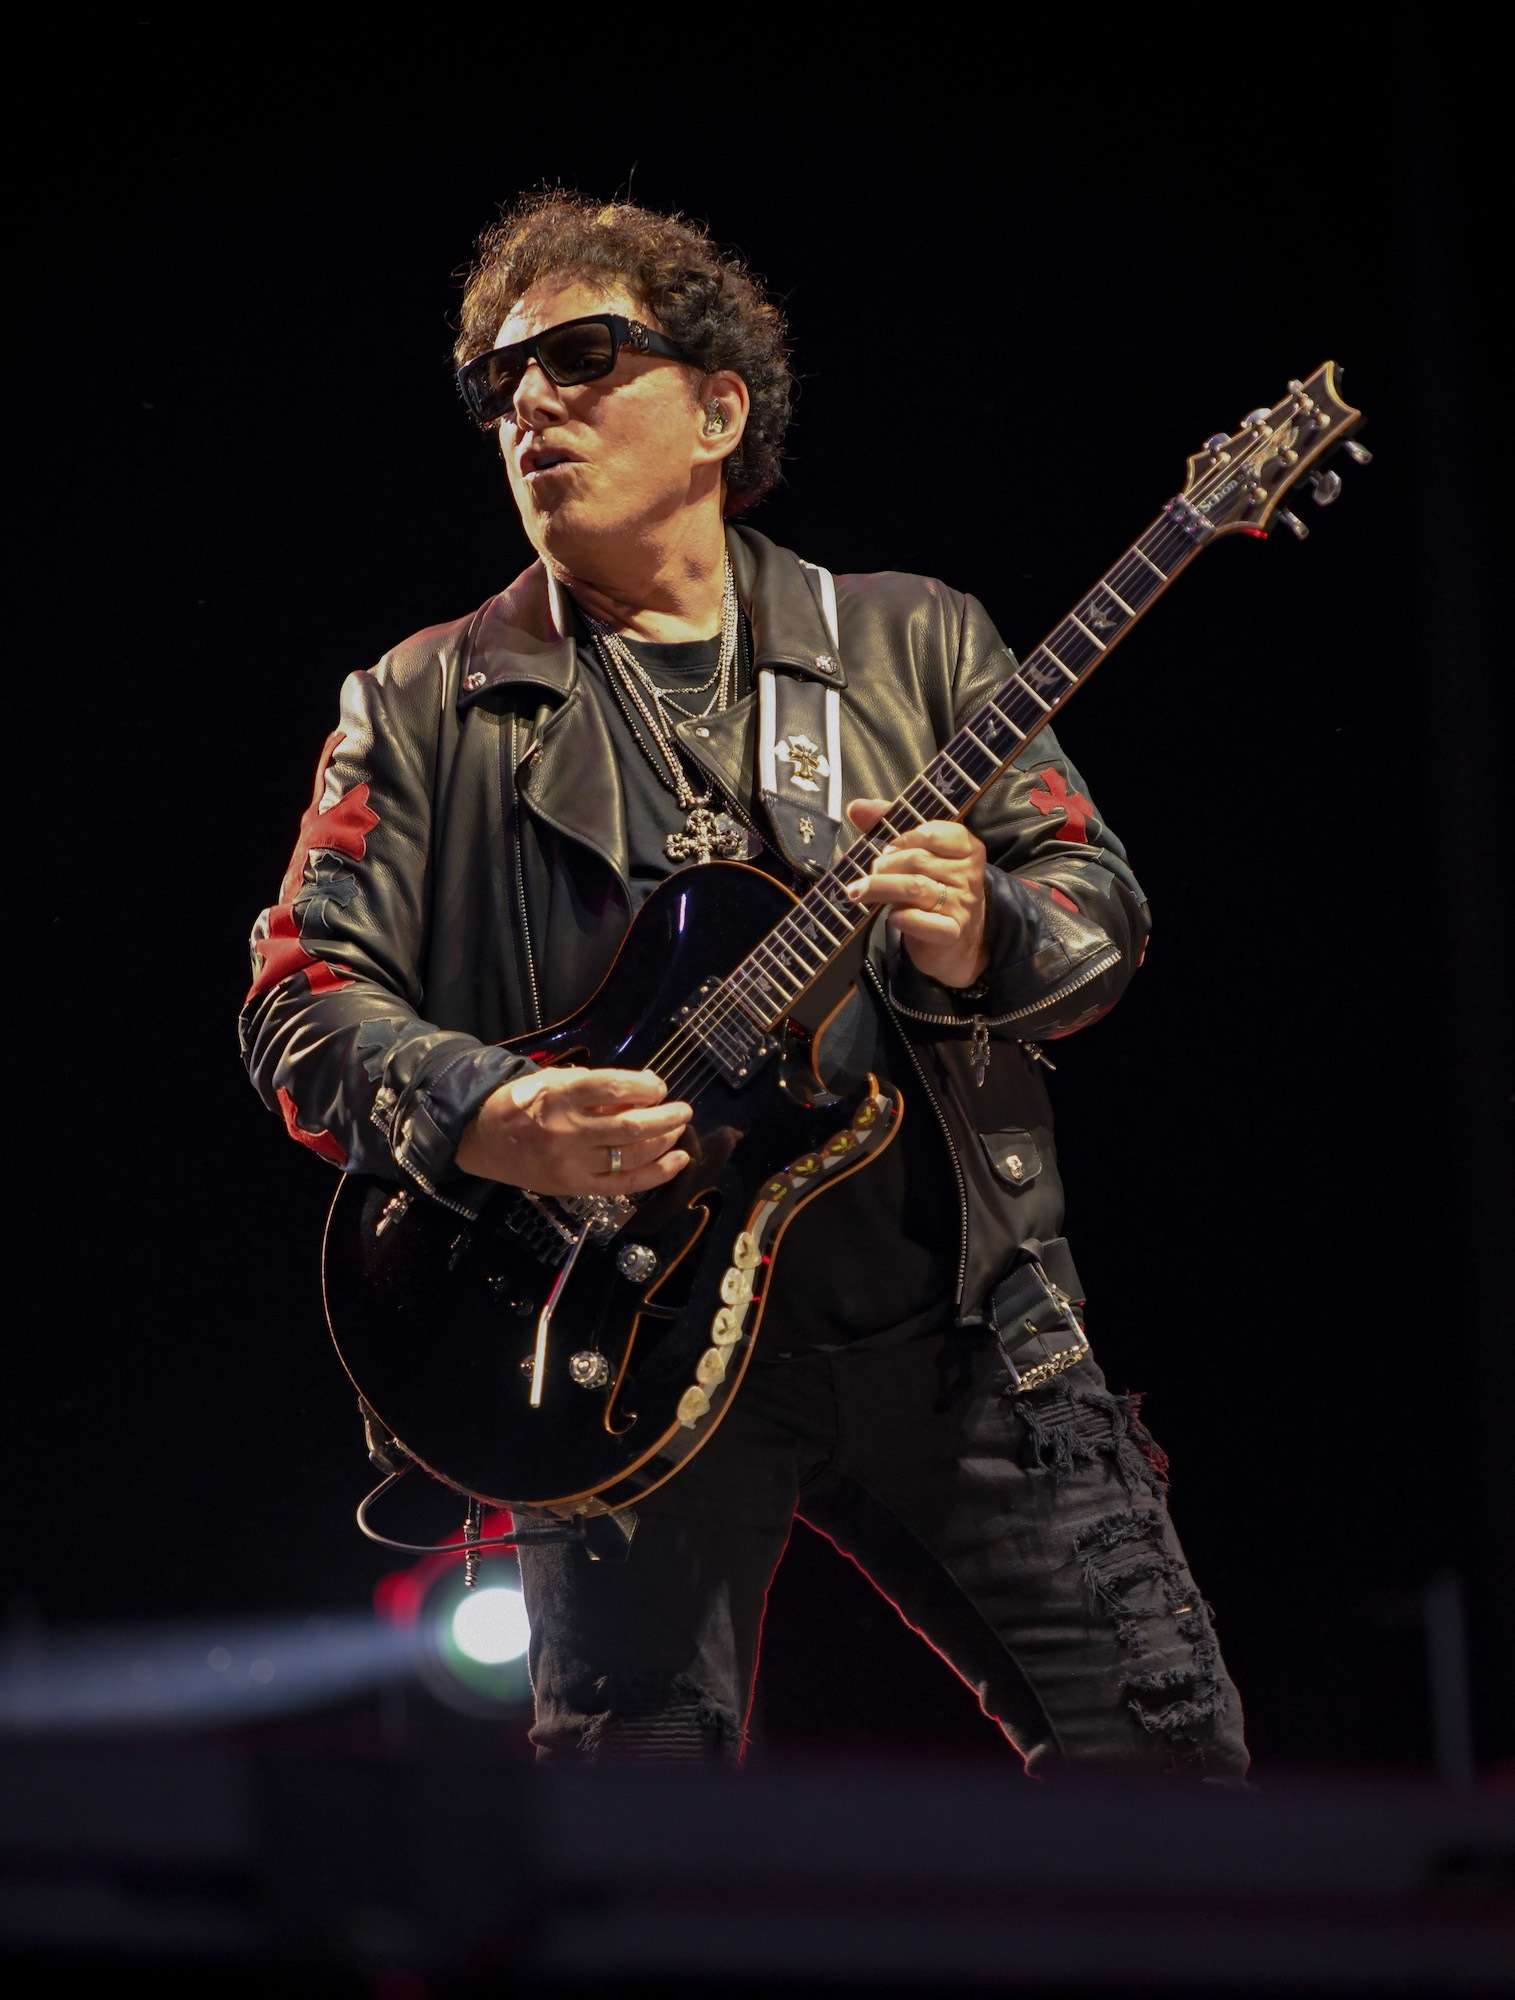 Journey Live at Lollapalooza [GALLERY] 12